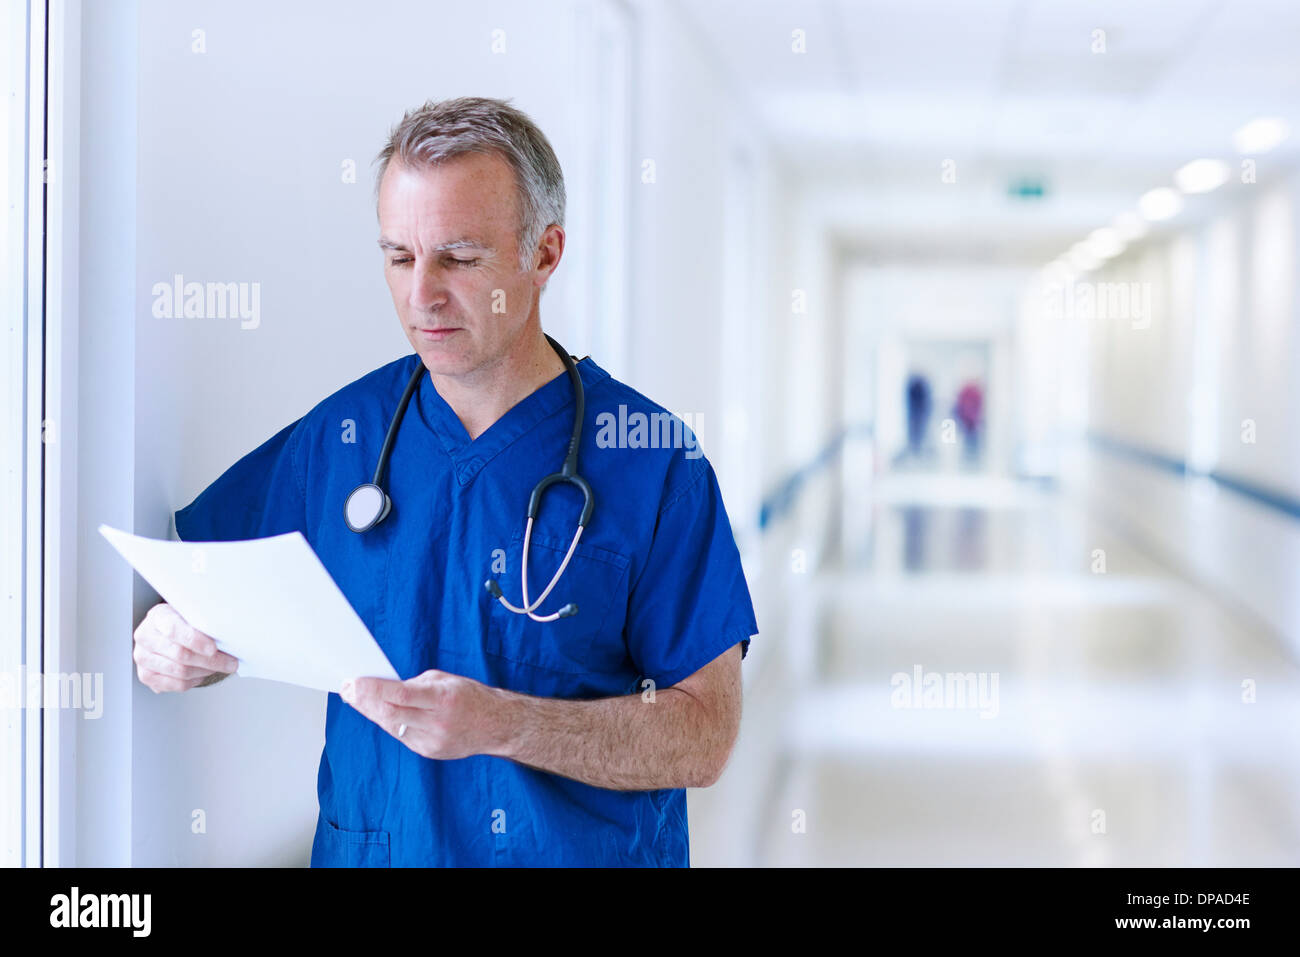 Doctor standing in corridor reading medical records Banque D'Images